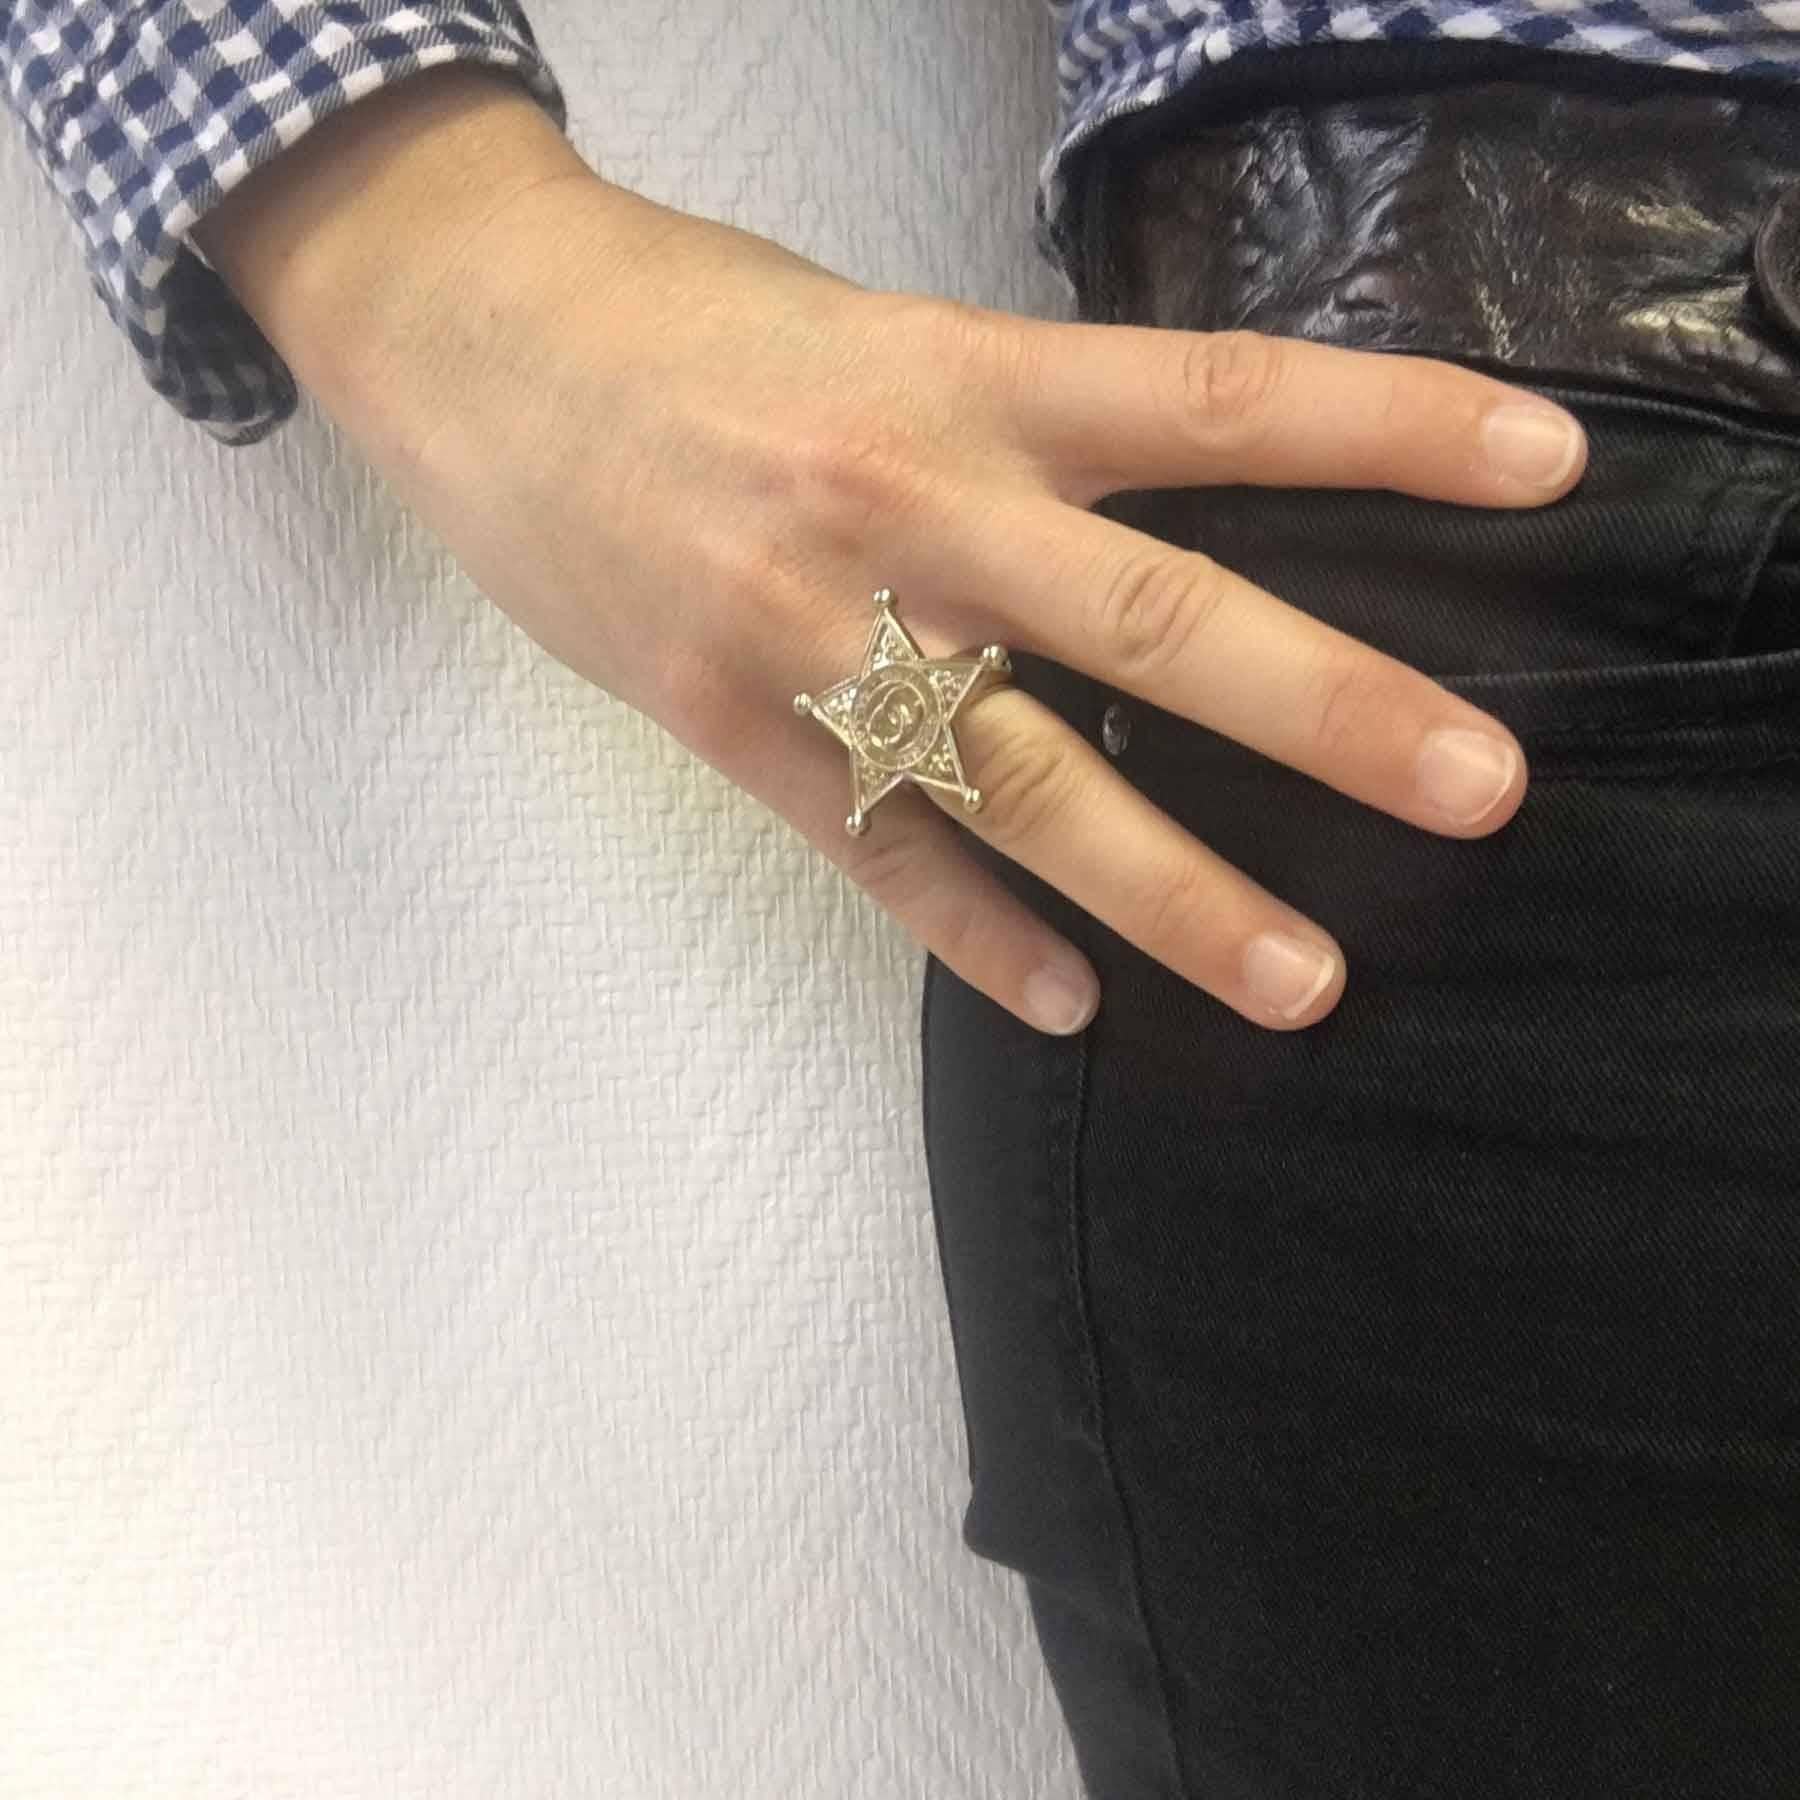 Chanel ring, Sheriff's star, in gilded metal. Paris-Dallas Collection 2013/2014.

Made in France.

Dimensions: Size 52, inside diameter: 1.7 cm, ring width: 0.6 cm

Will be delivered in a black box, Chanel ribbon and white camellia